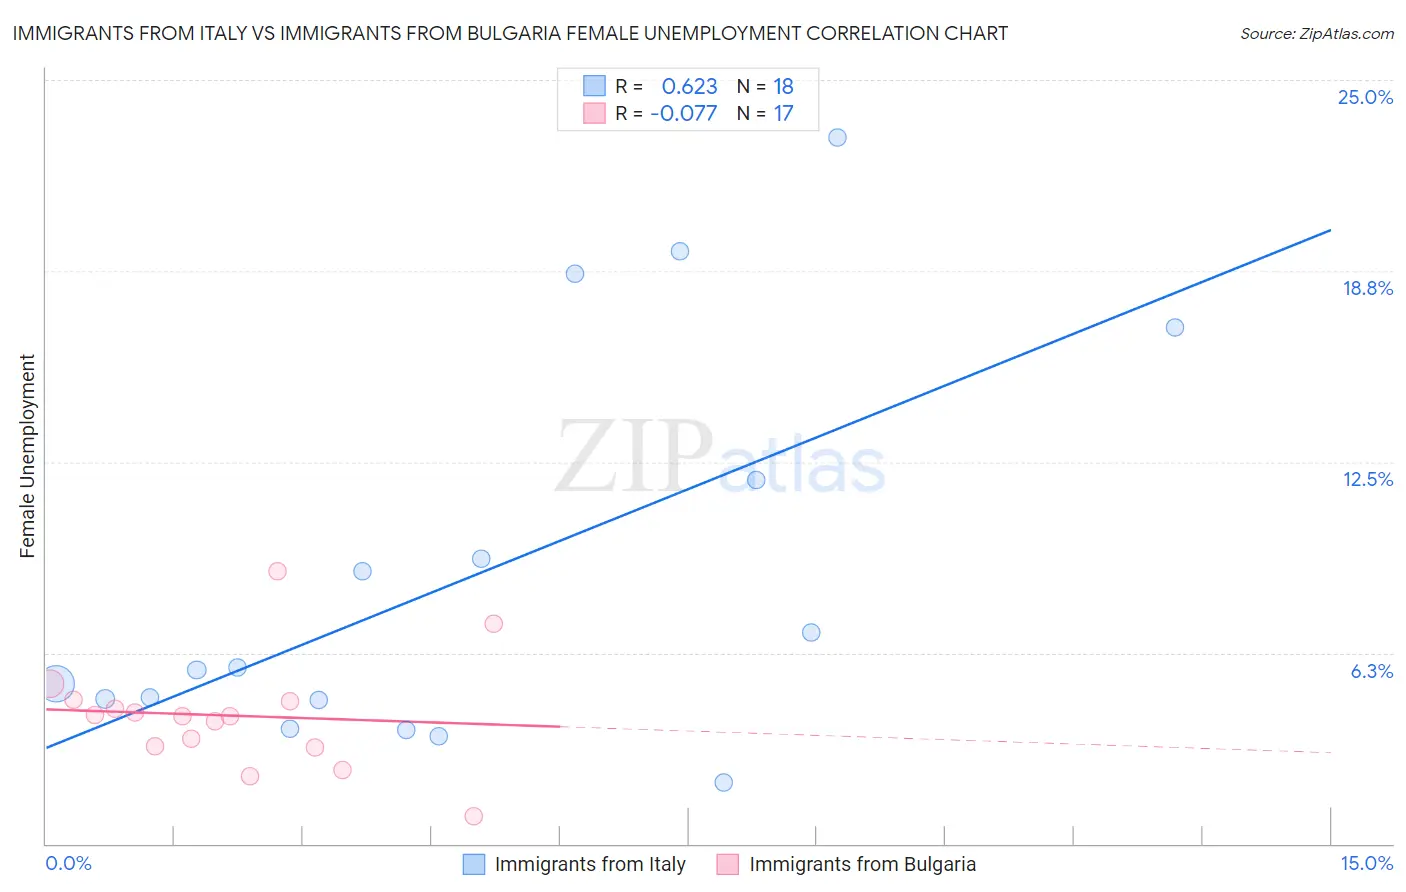 Immigrants from Italy vs Immigrants from Bulgaria Female Unemployment